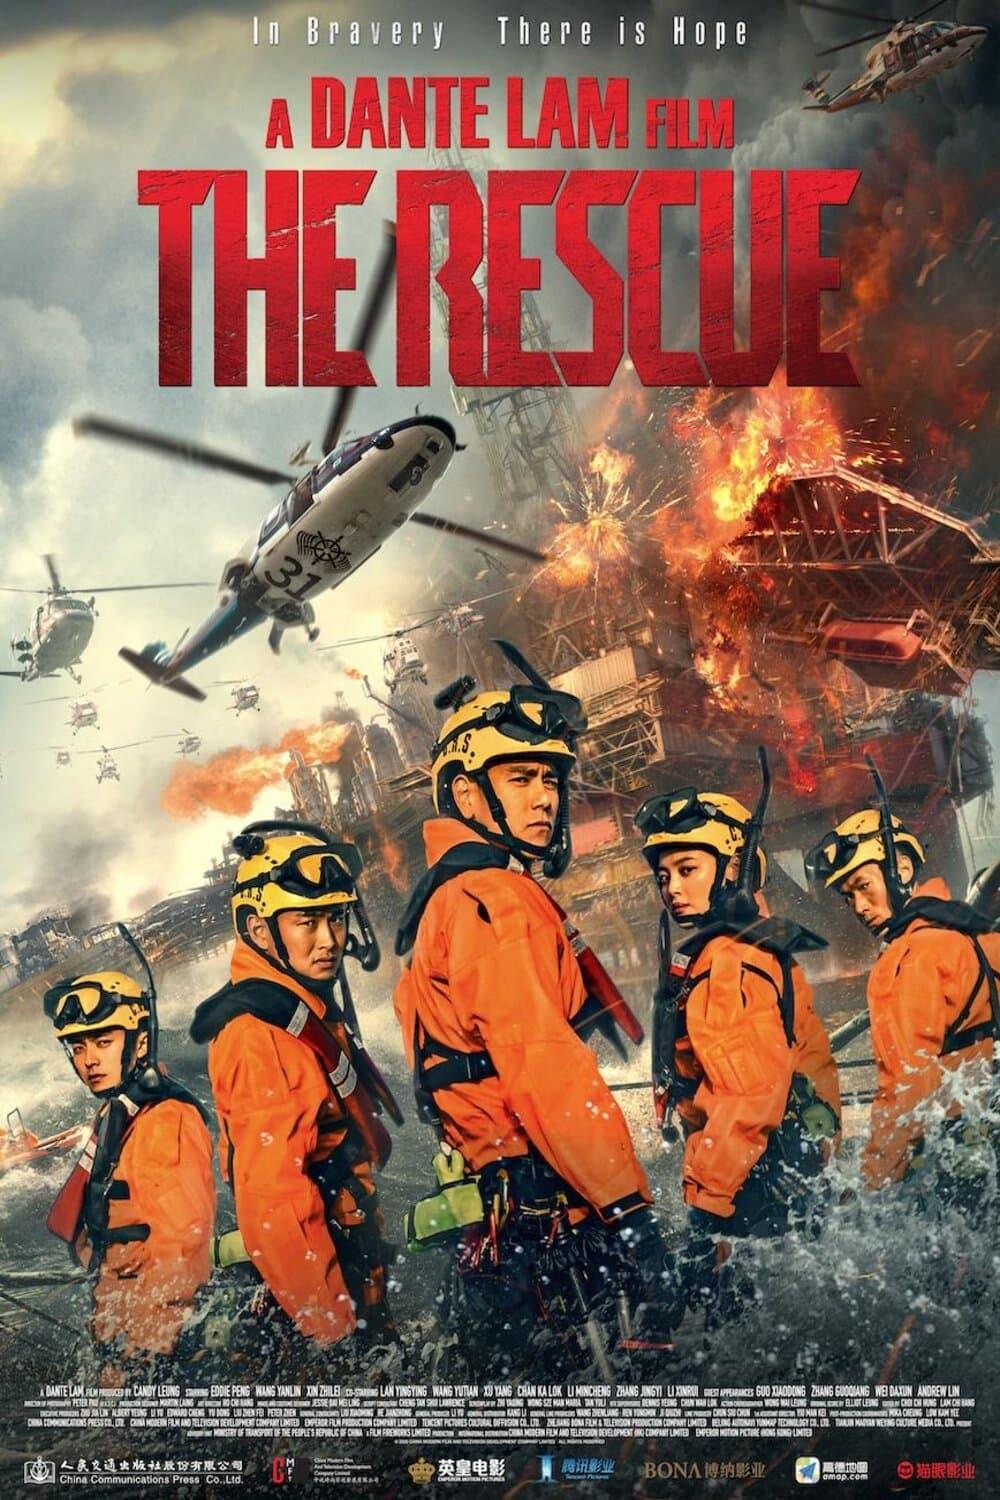 The Rescue poster